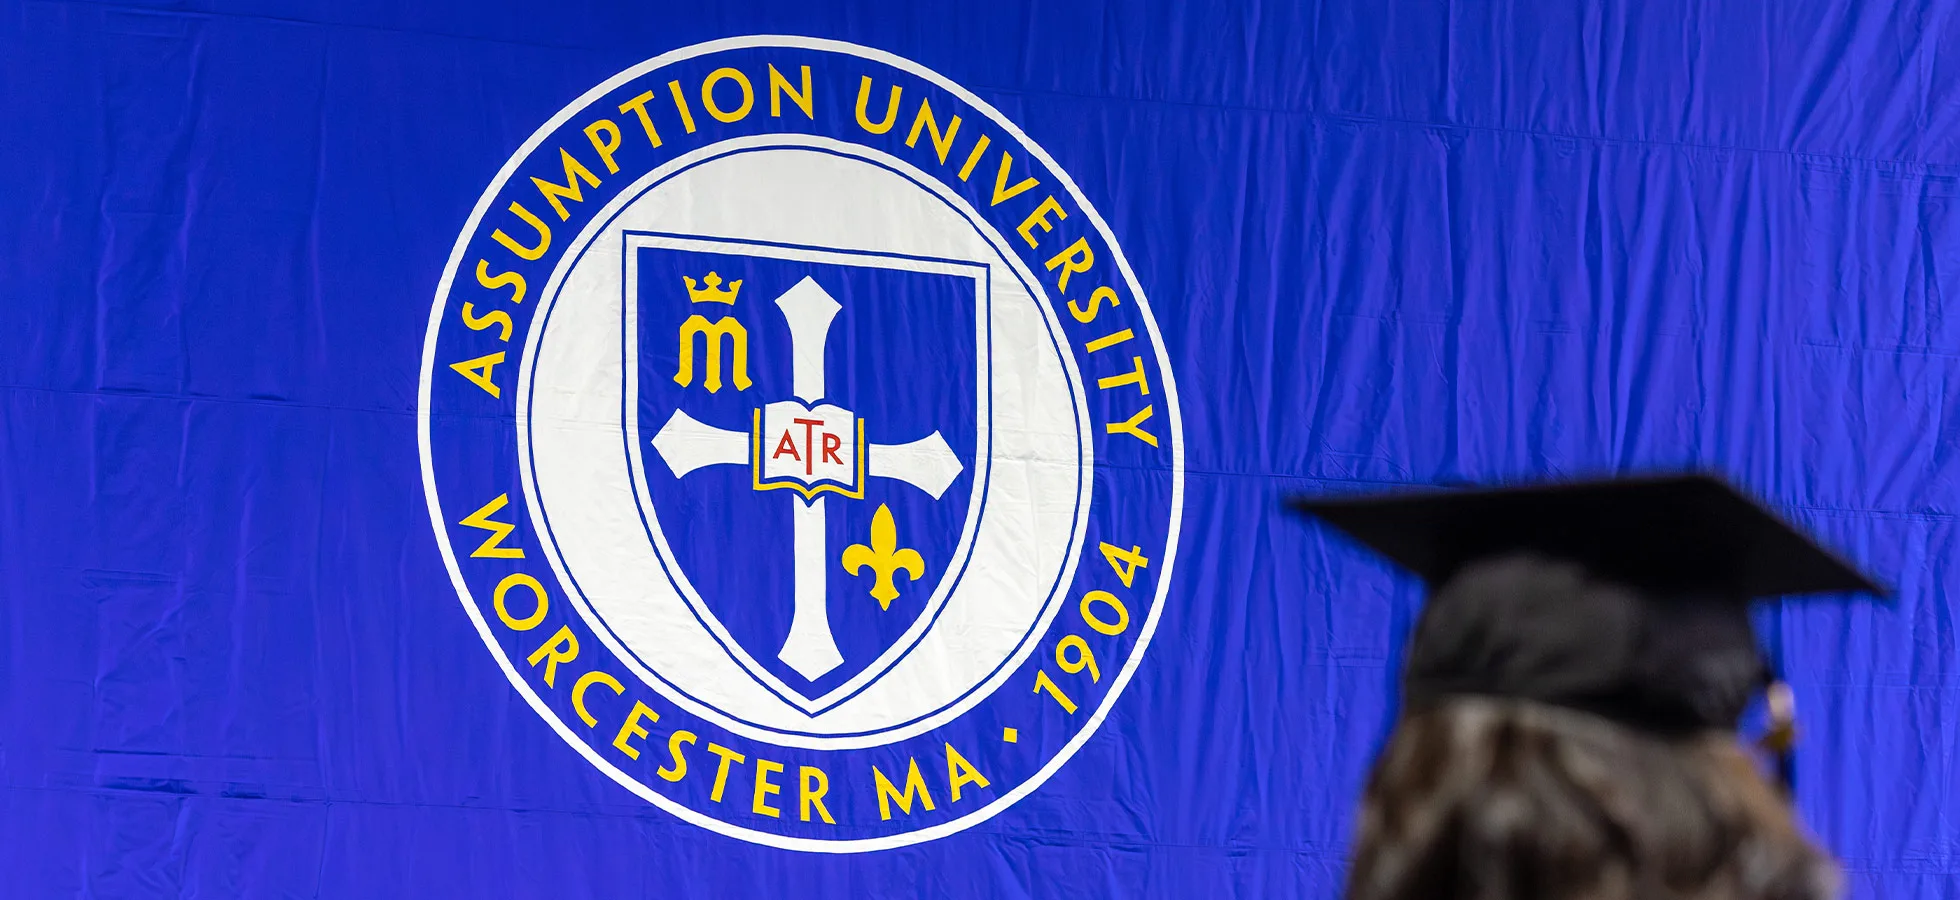 Assumption University is delighted to announce its speakers and honorary degree recipients for both the Undergraduate and Graduate School Commencement Ceremonies.